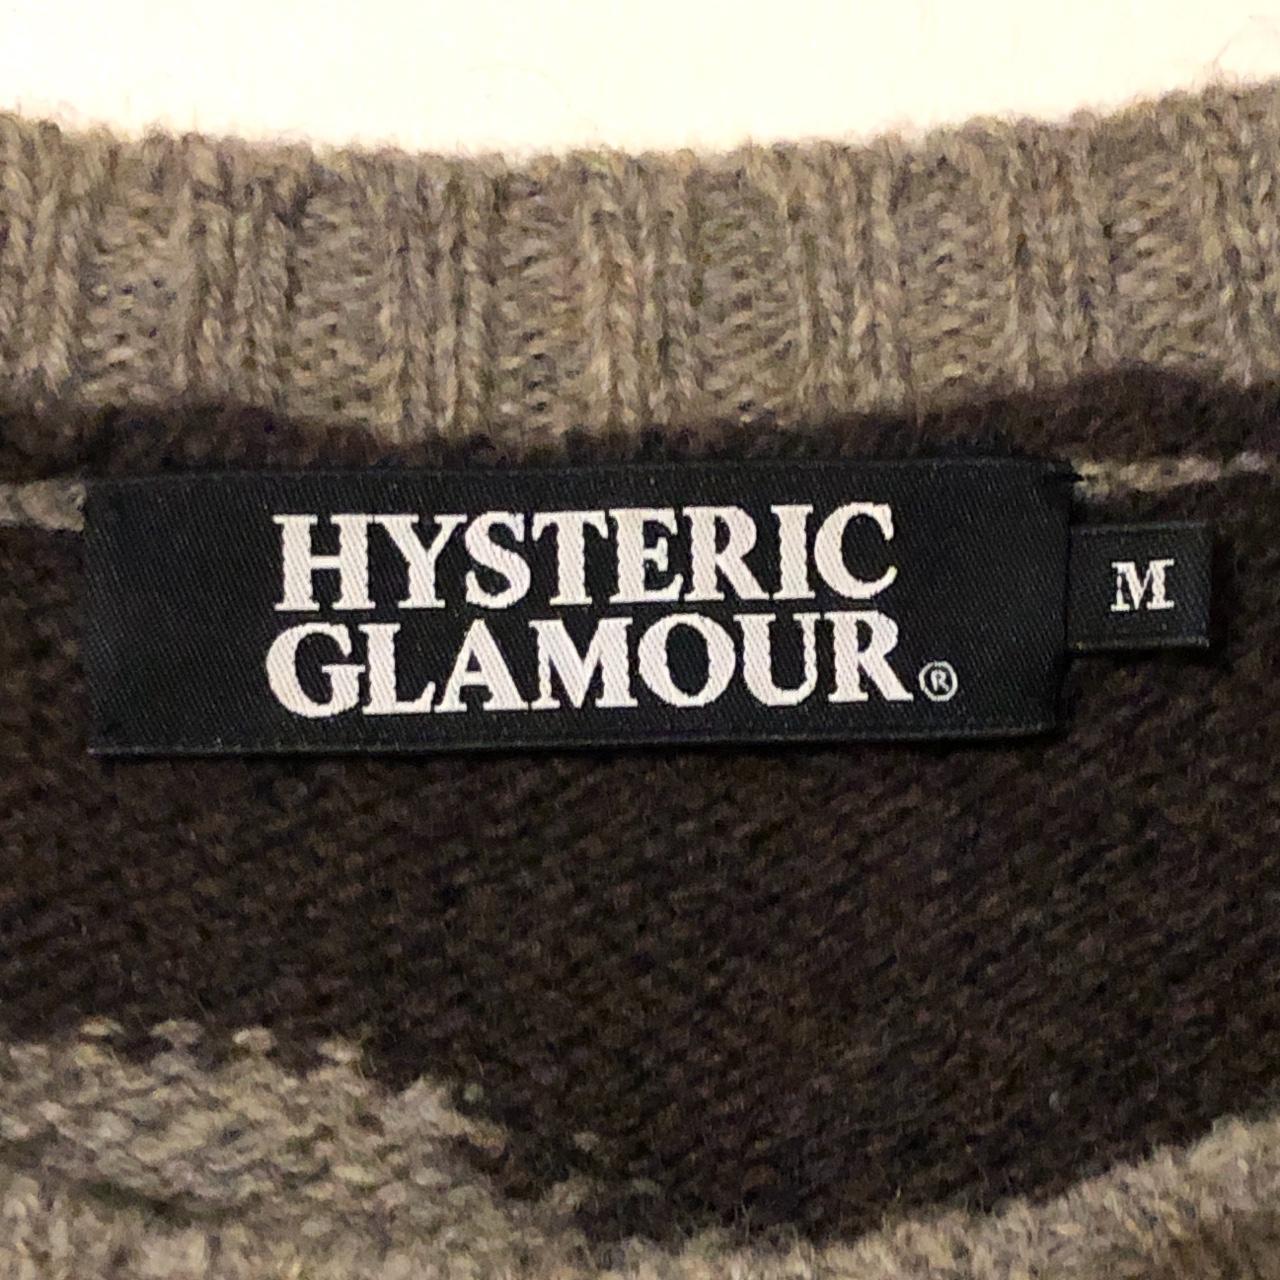 Hysteric Glamour Men's Brown and Black Jumper (3)